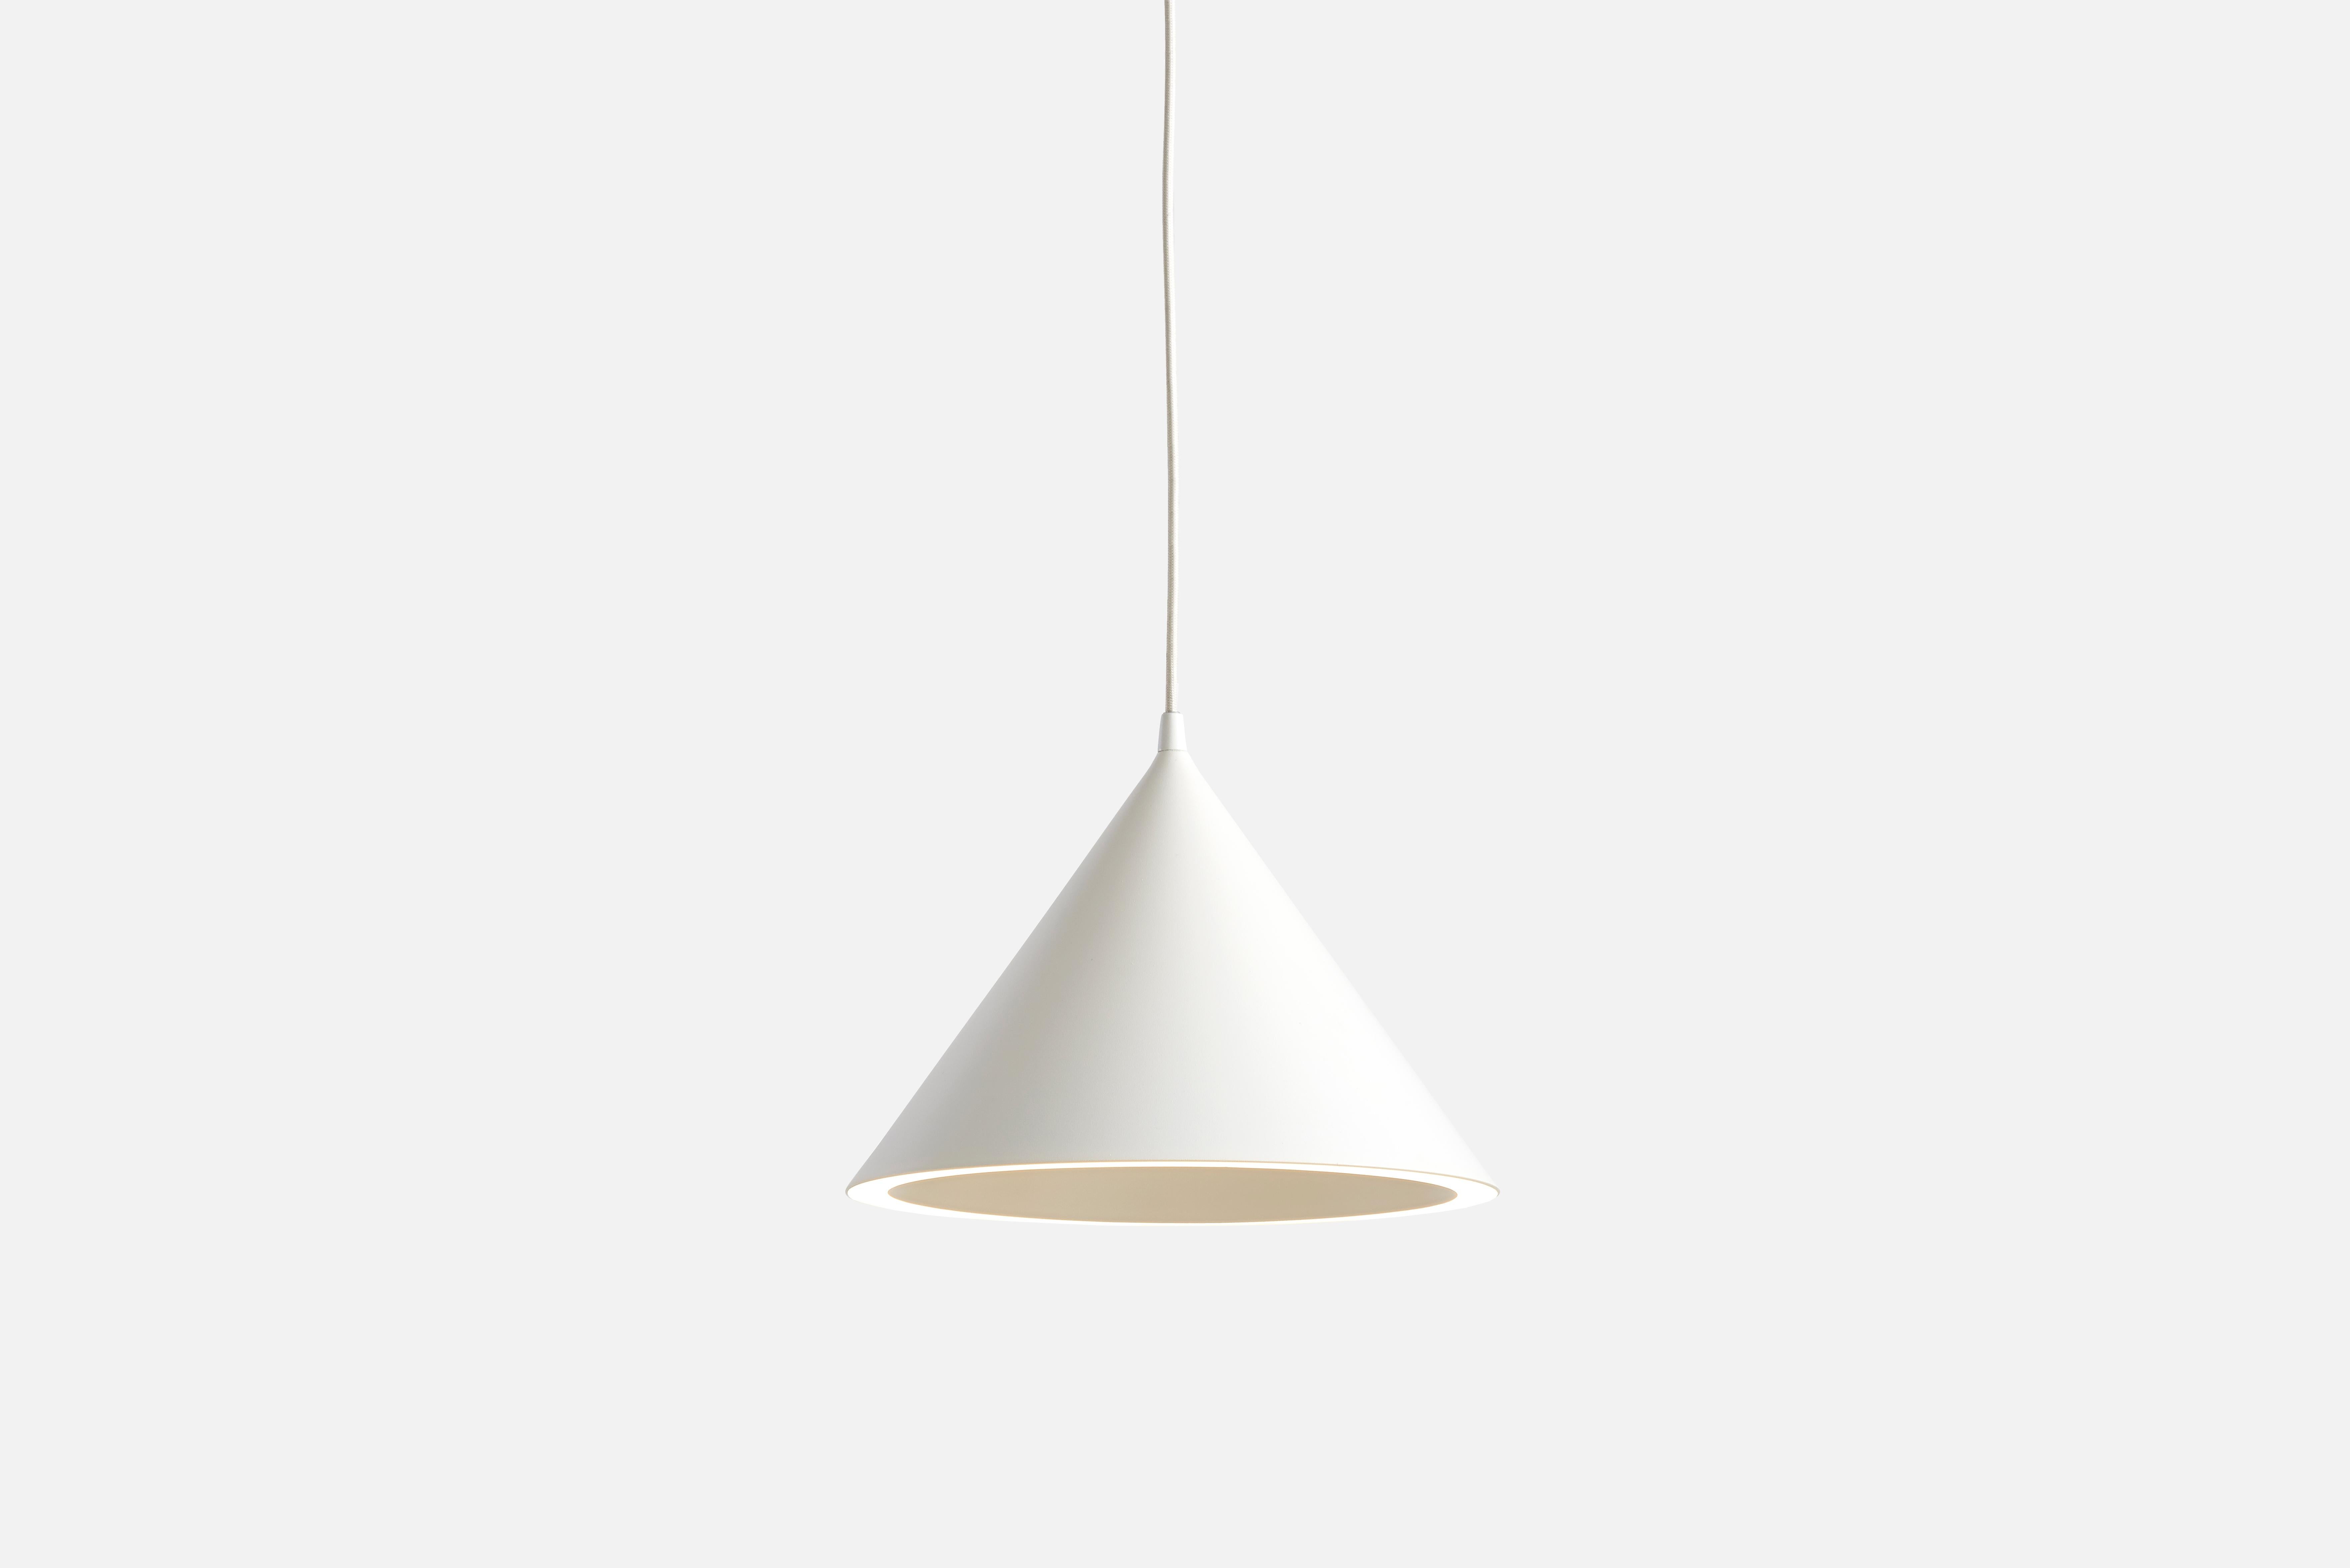 Small White Annular pendant lamp by MSDS Studio
Materials: Aluminum.
Dimensions: D 32 x H 23.8 cm
Available in white, nude, mint, black.
Available in 2 sizes: D32, D46.8 cm.

MSDS STUDIO is a successful Canadian design studio that works in